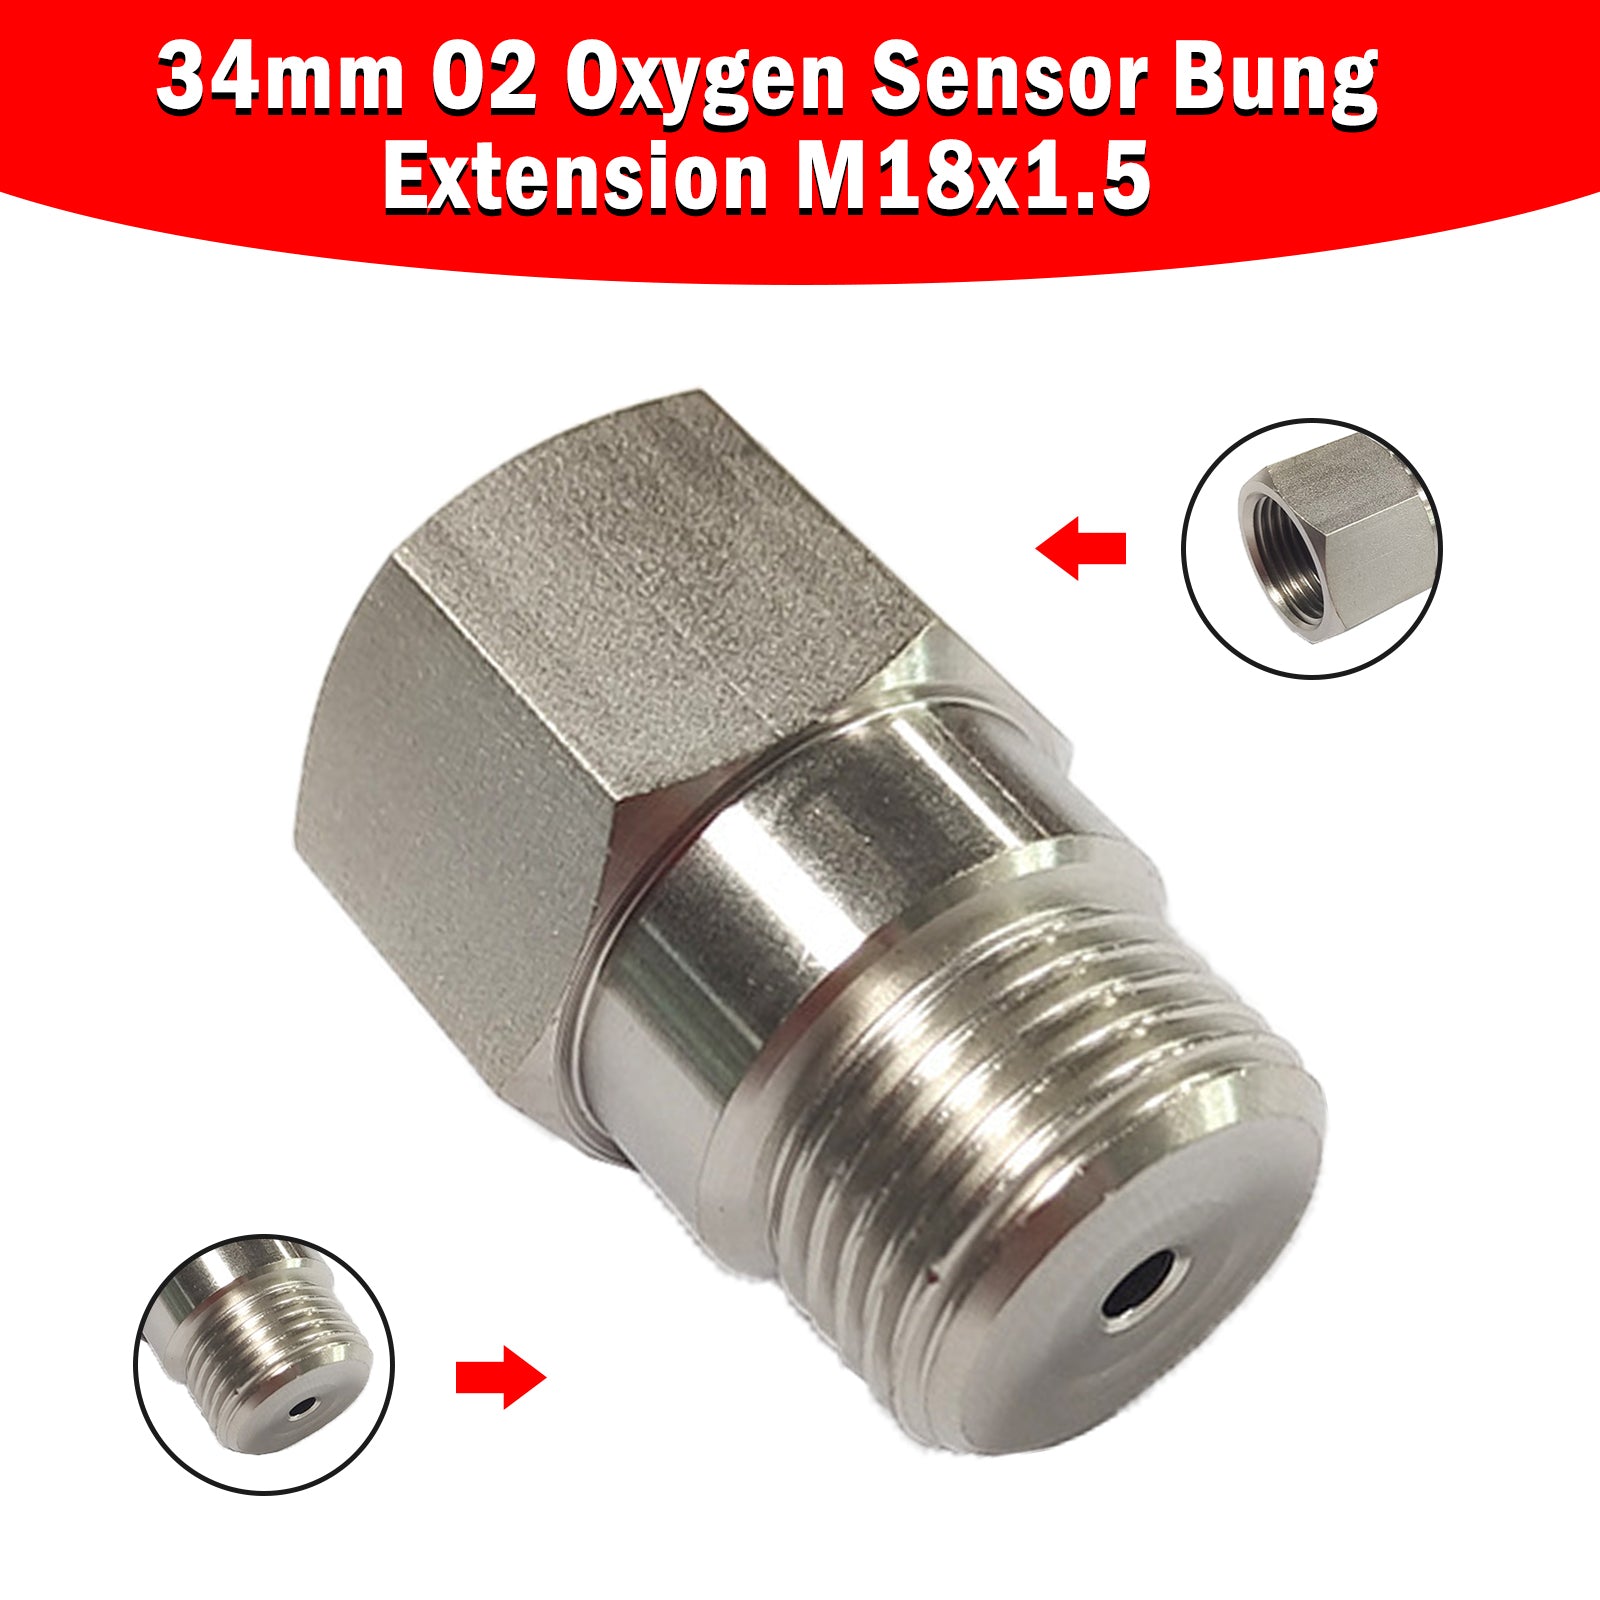 M18x1.5 Bung 34mm O2 Oxygen Sensor Test Pipe Extension Extender Adapter Spacer